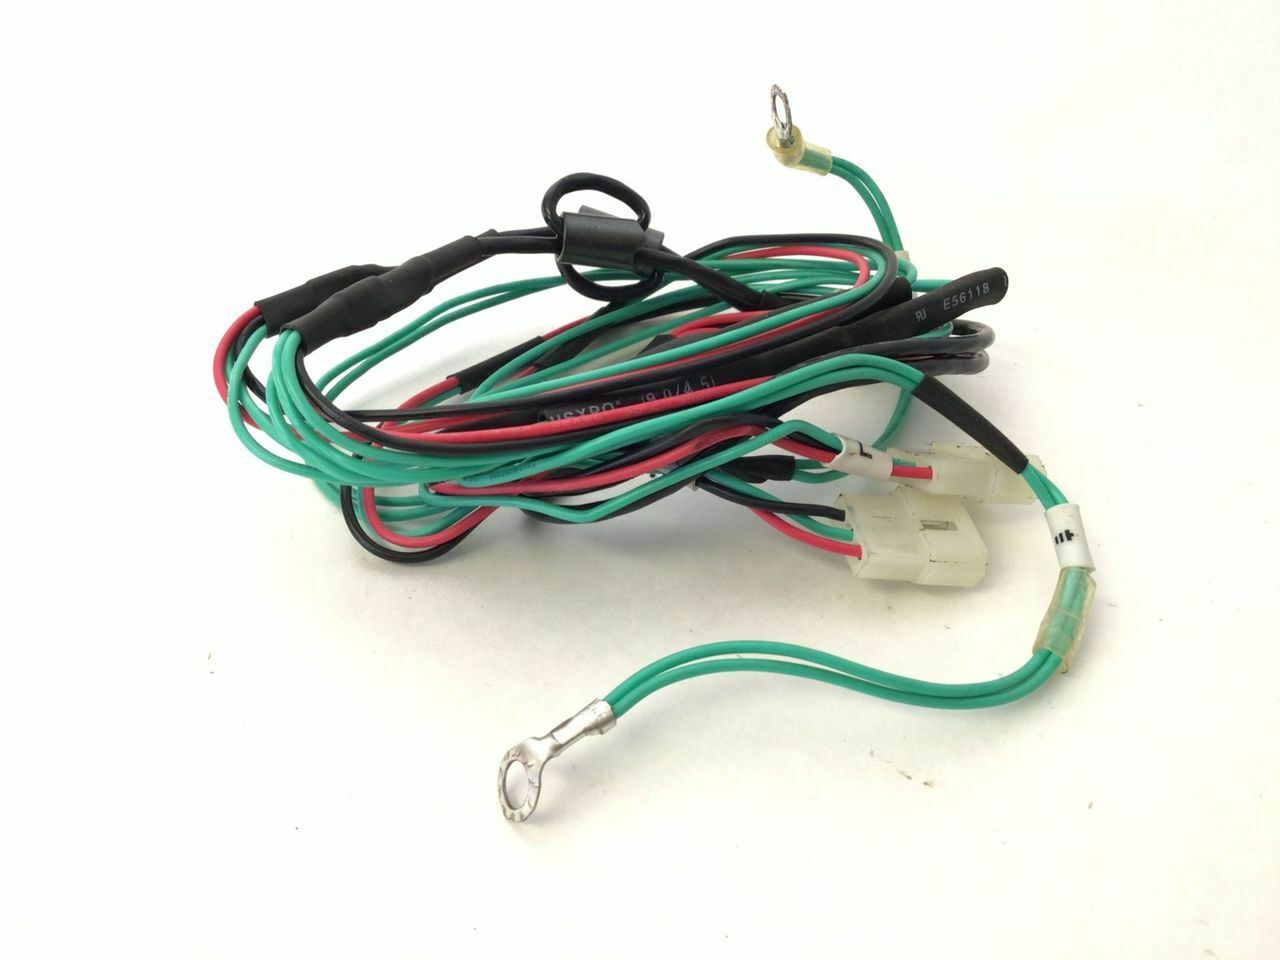 SportsArt 3106 3108 3110 Treadmill Left and Right Heart Rate Pulse Wire 3106-60 (Used)